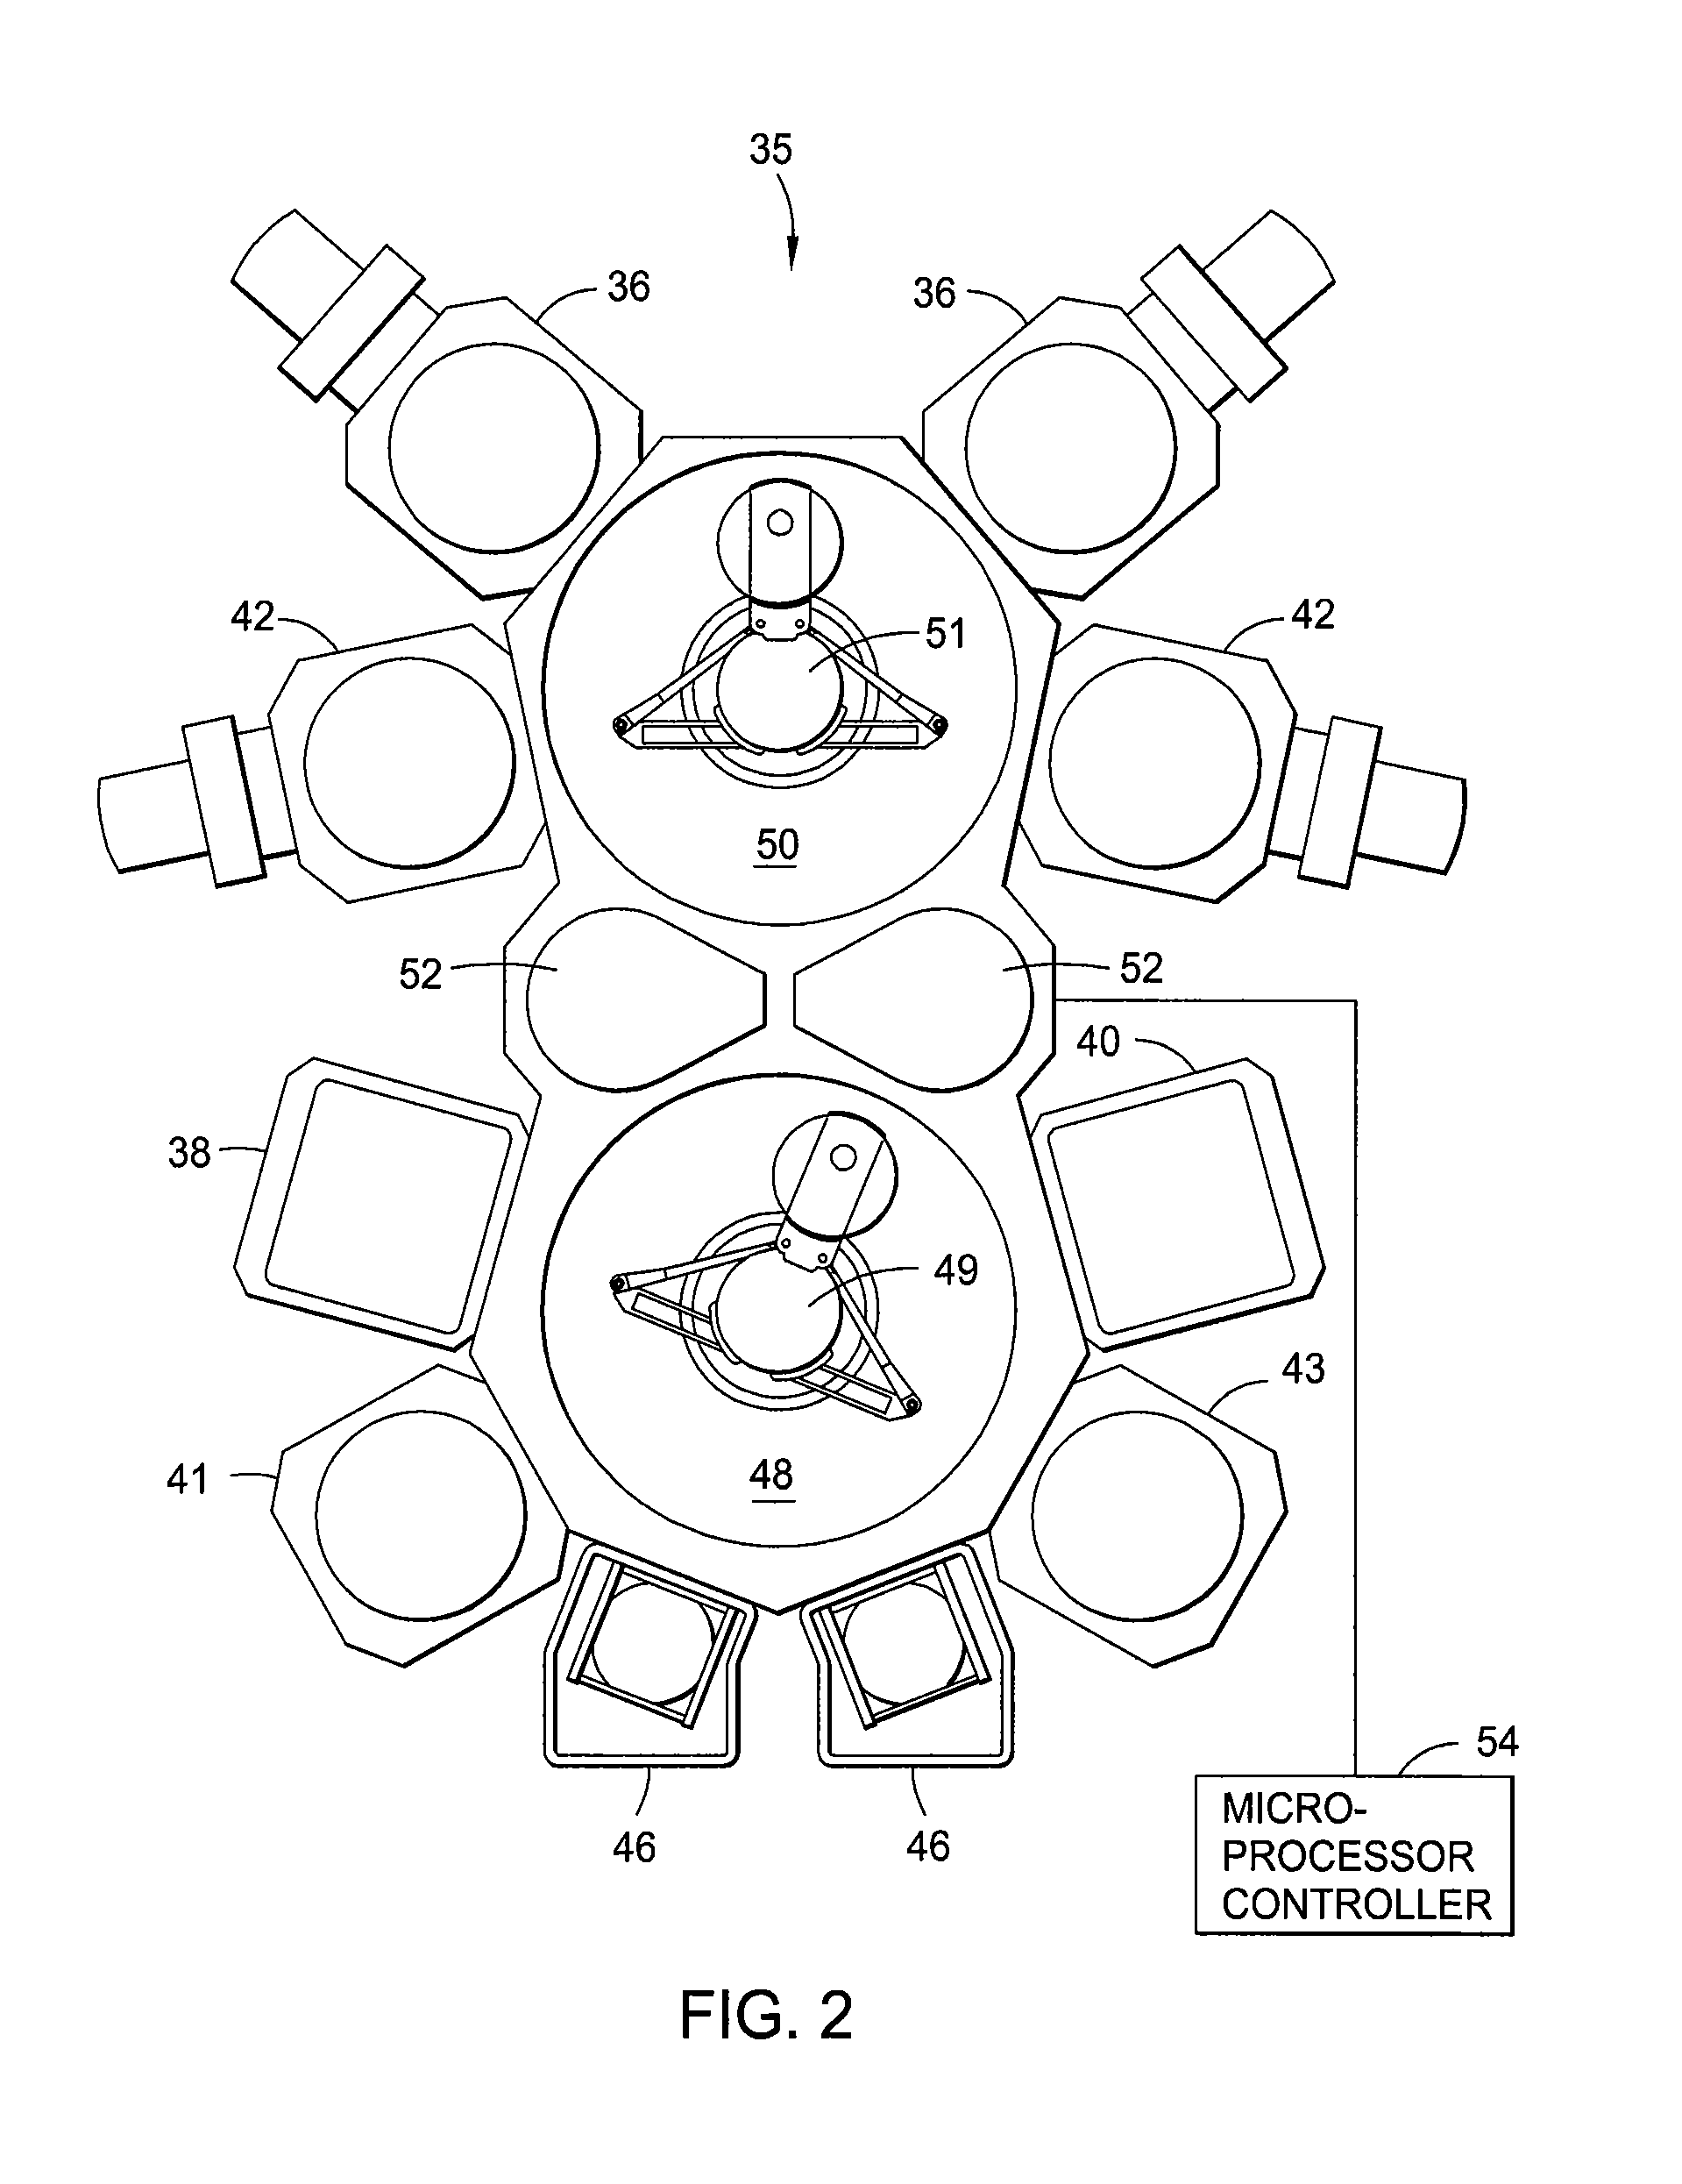 Process for forming cobalt-containing materials